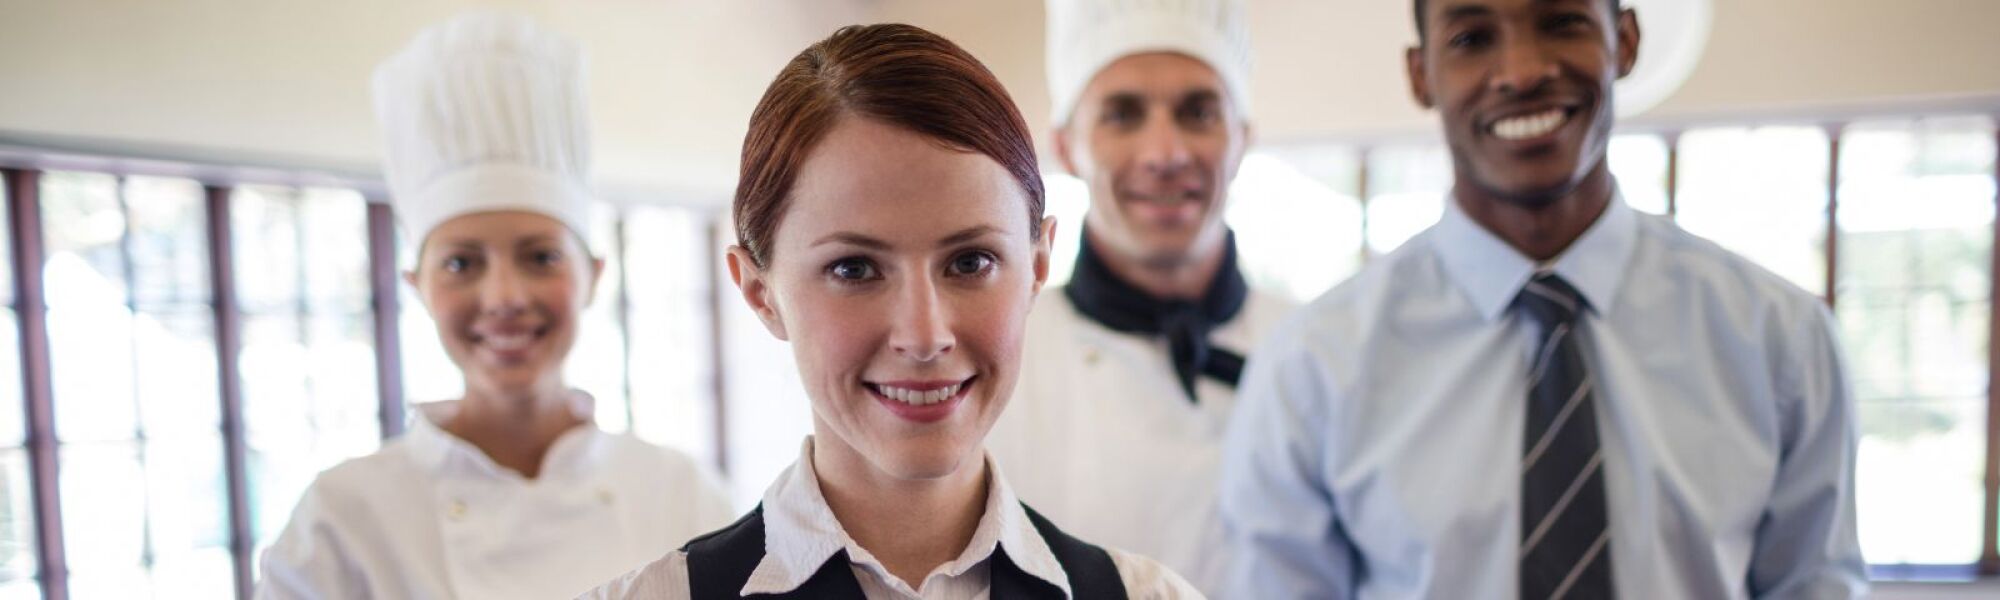 Hospitality Services -  Essential Skills for the Workplace